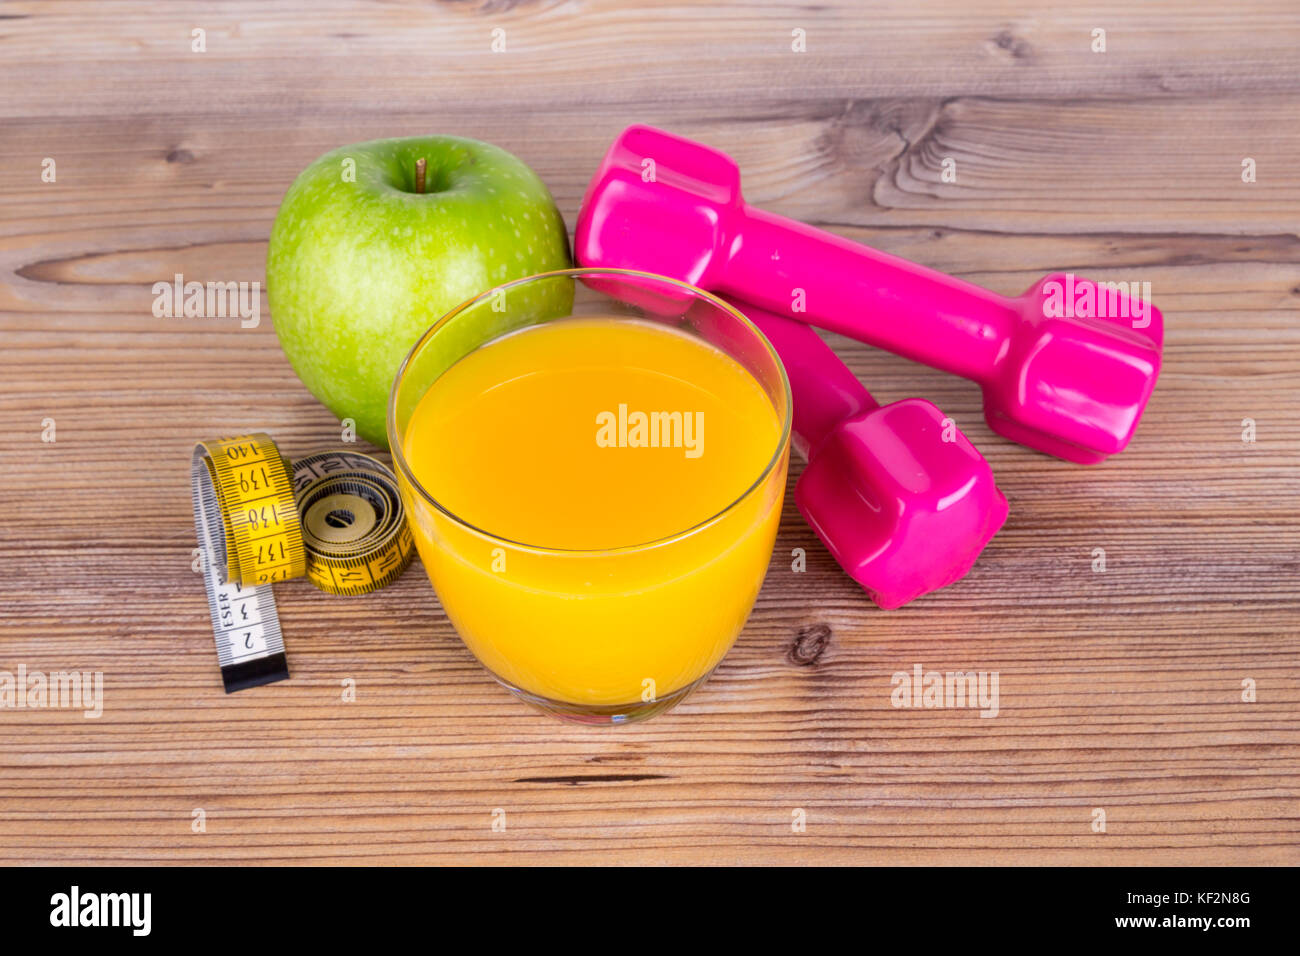 Close up top view of fruits, orange juice, light weight and green apple, measurement tape with healthy fit concept on wooden background. Stock Photo